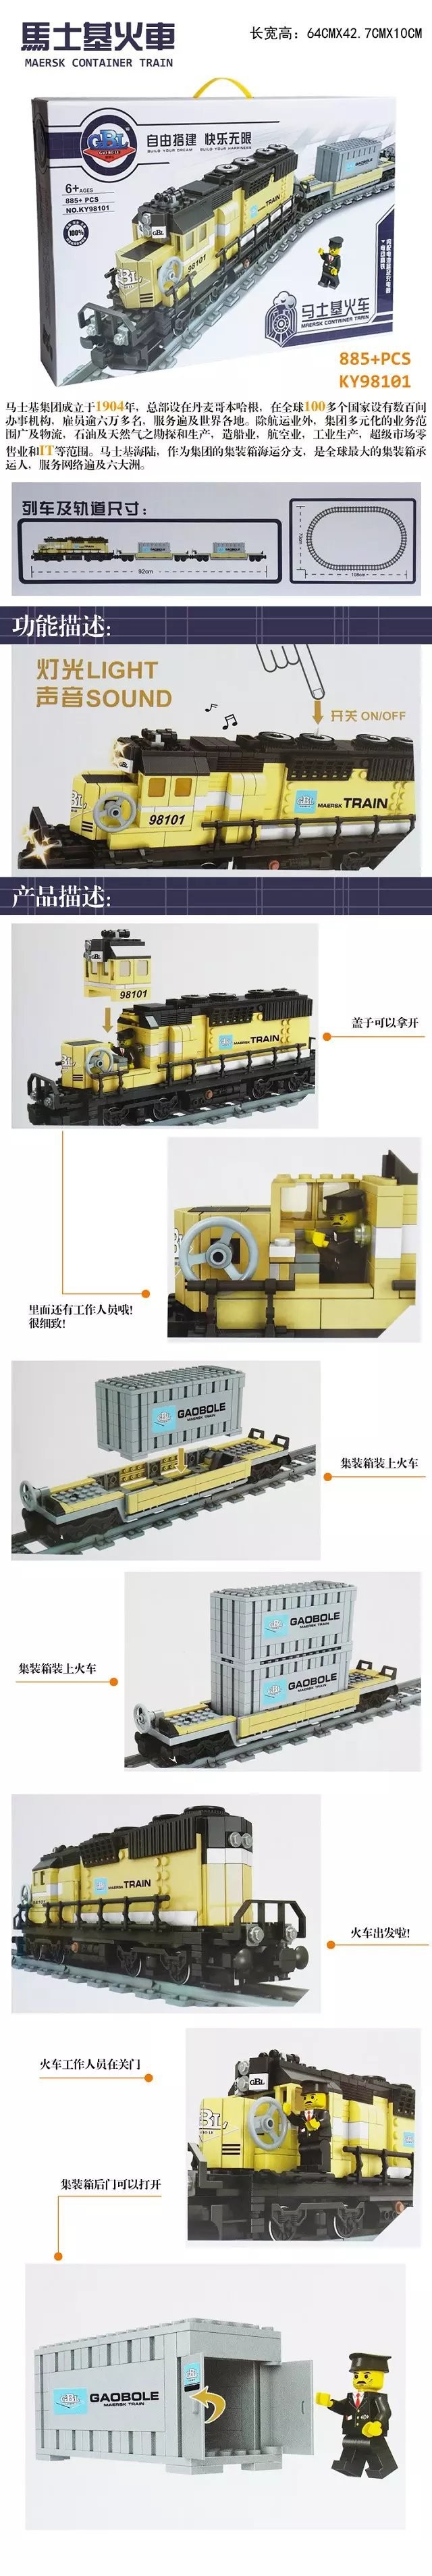 New-Battery-Powered-Maersk-Train-Container-diesel-electric-freight-Building-Blocks-educational-toys-for-children-32745343531